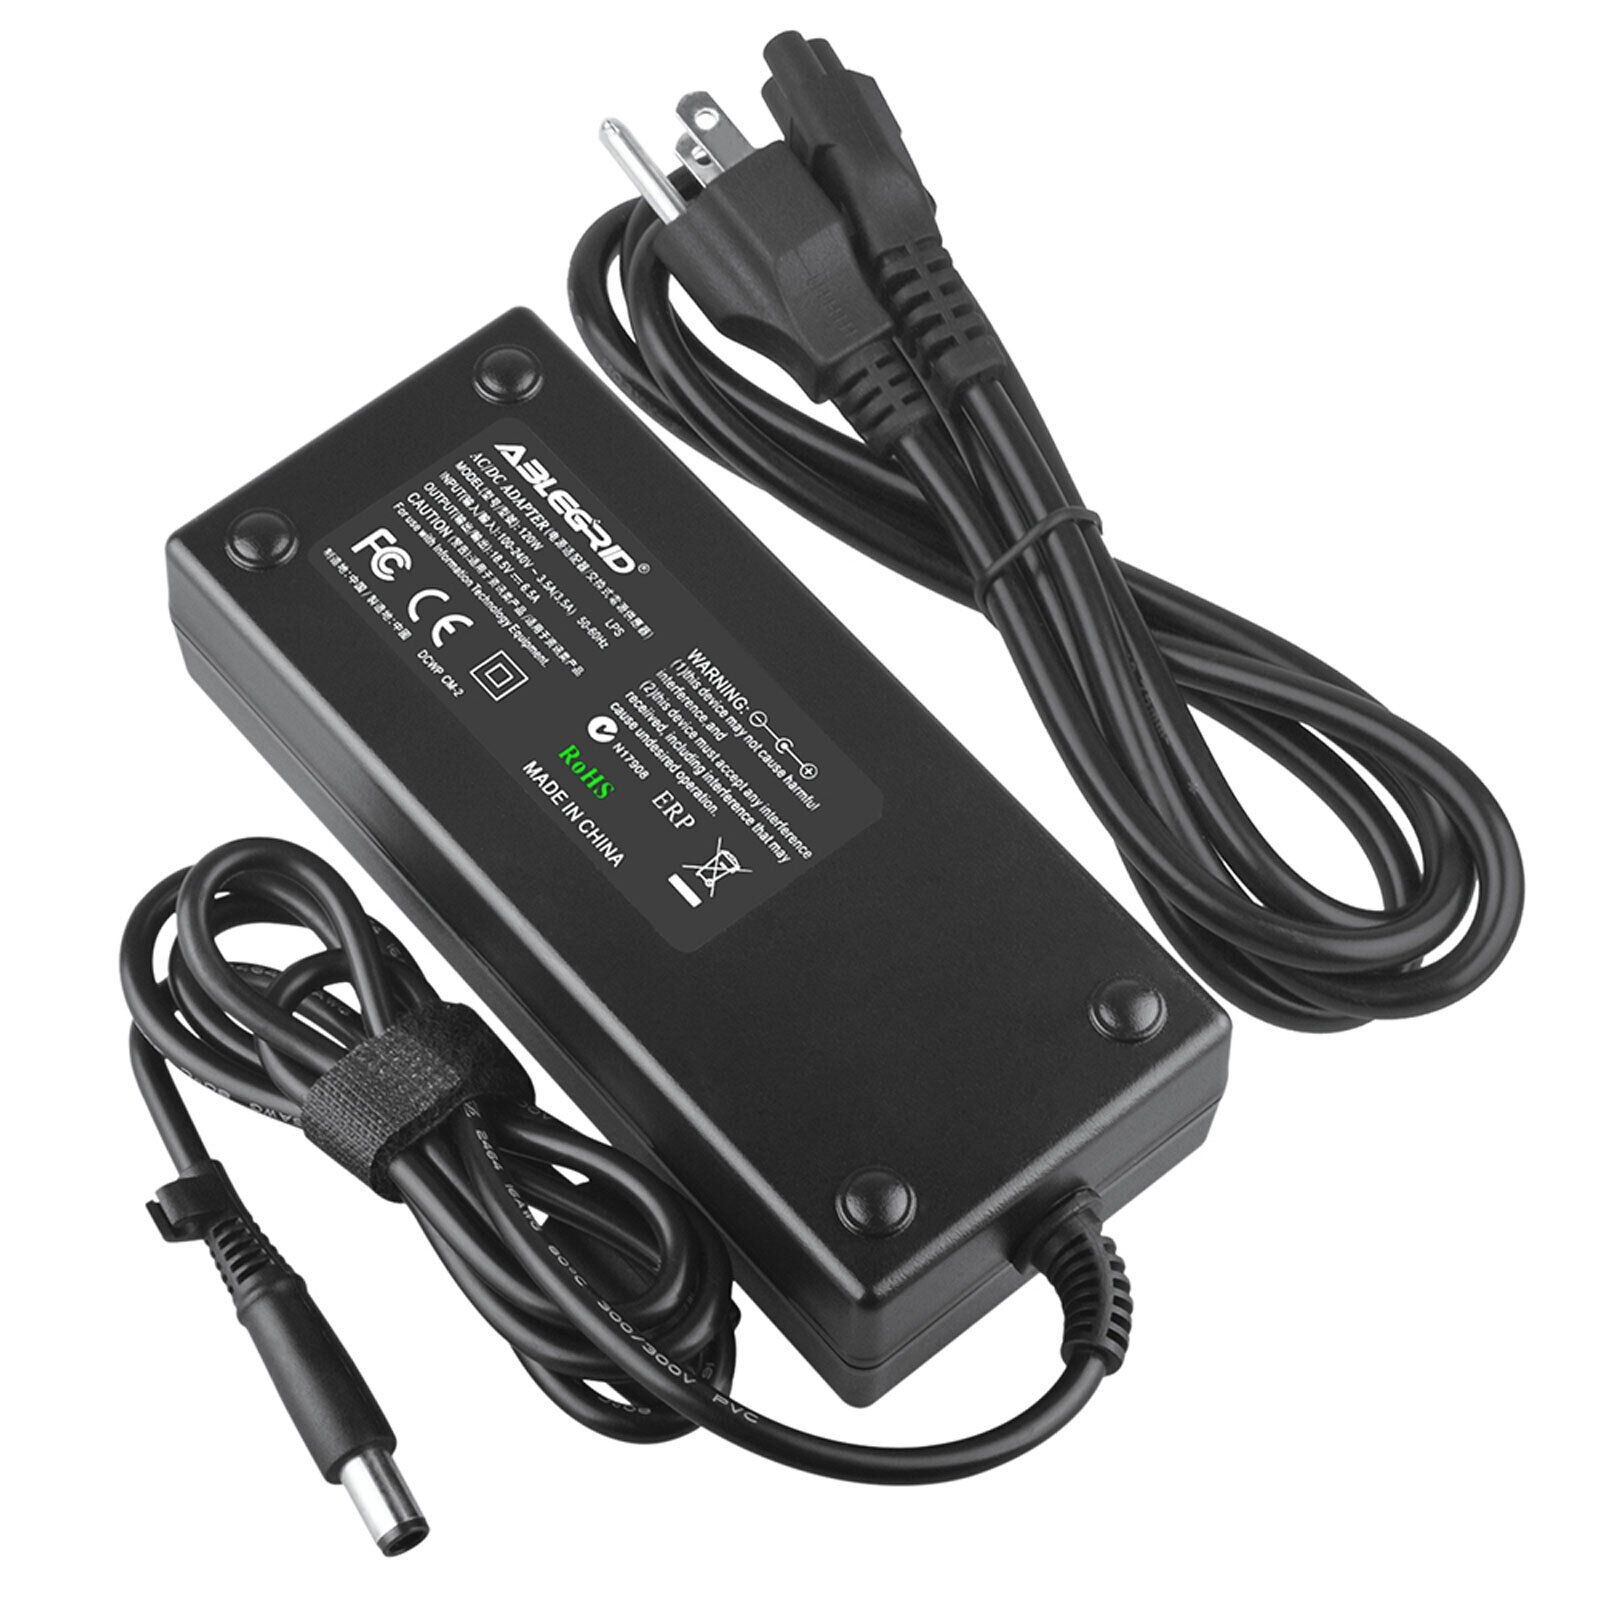 AC Adapter Charger Power For HP Pavilion 24-r045qe 24-R114 24-R124 All-in-One